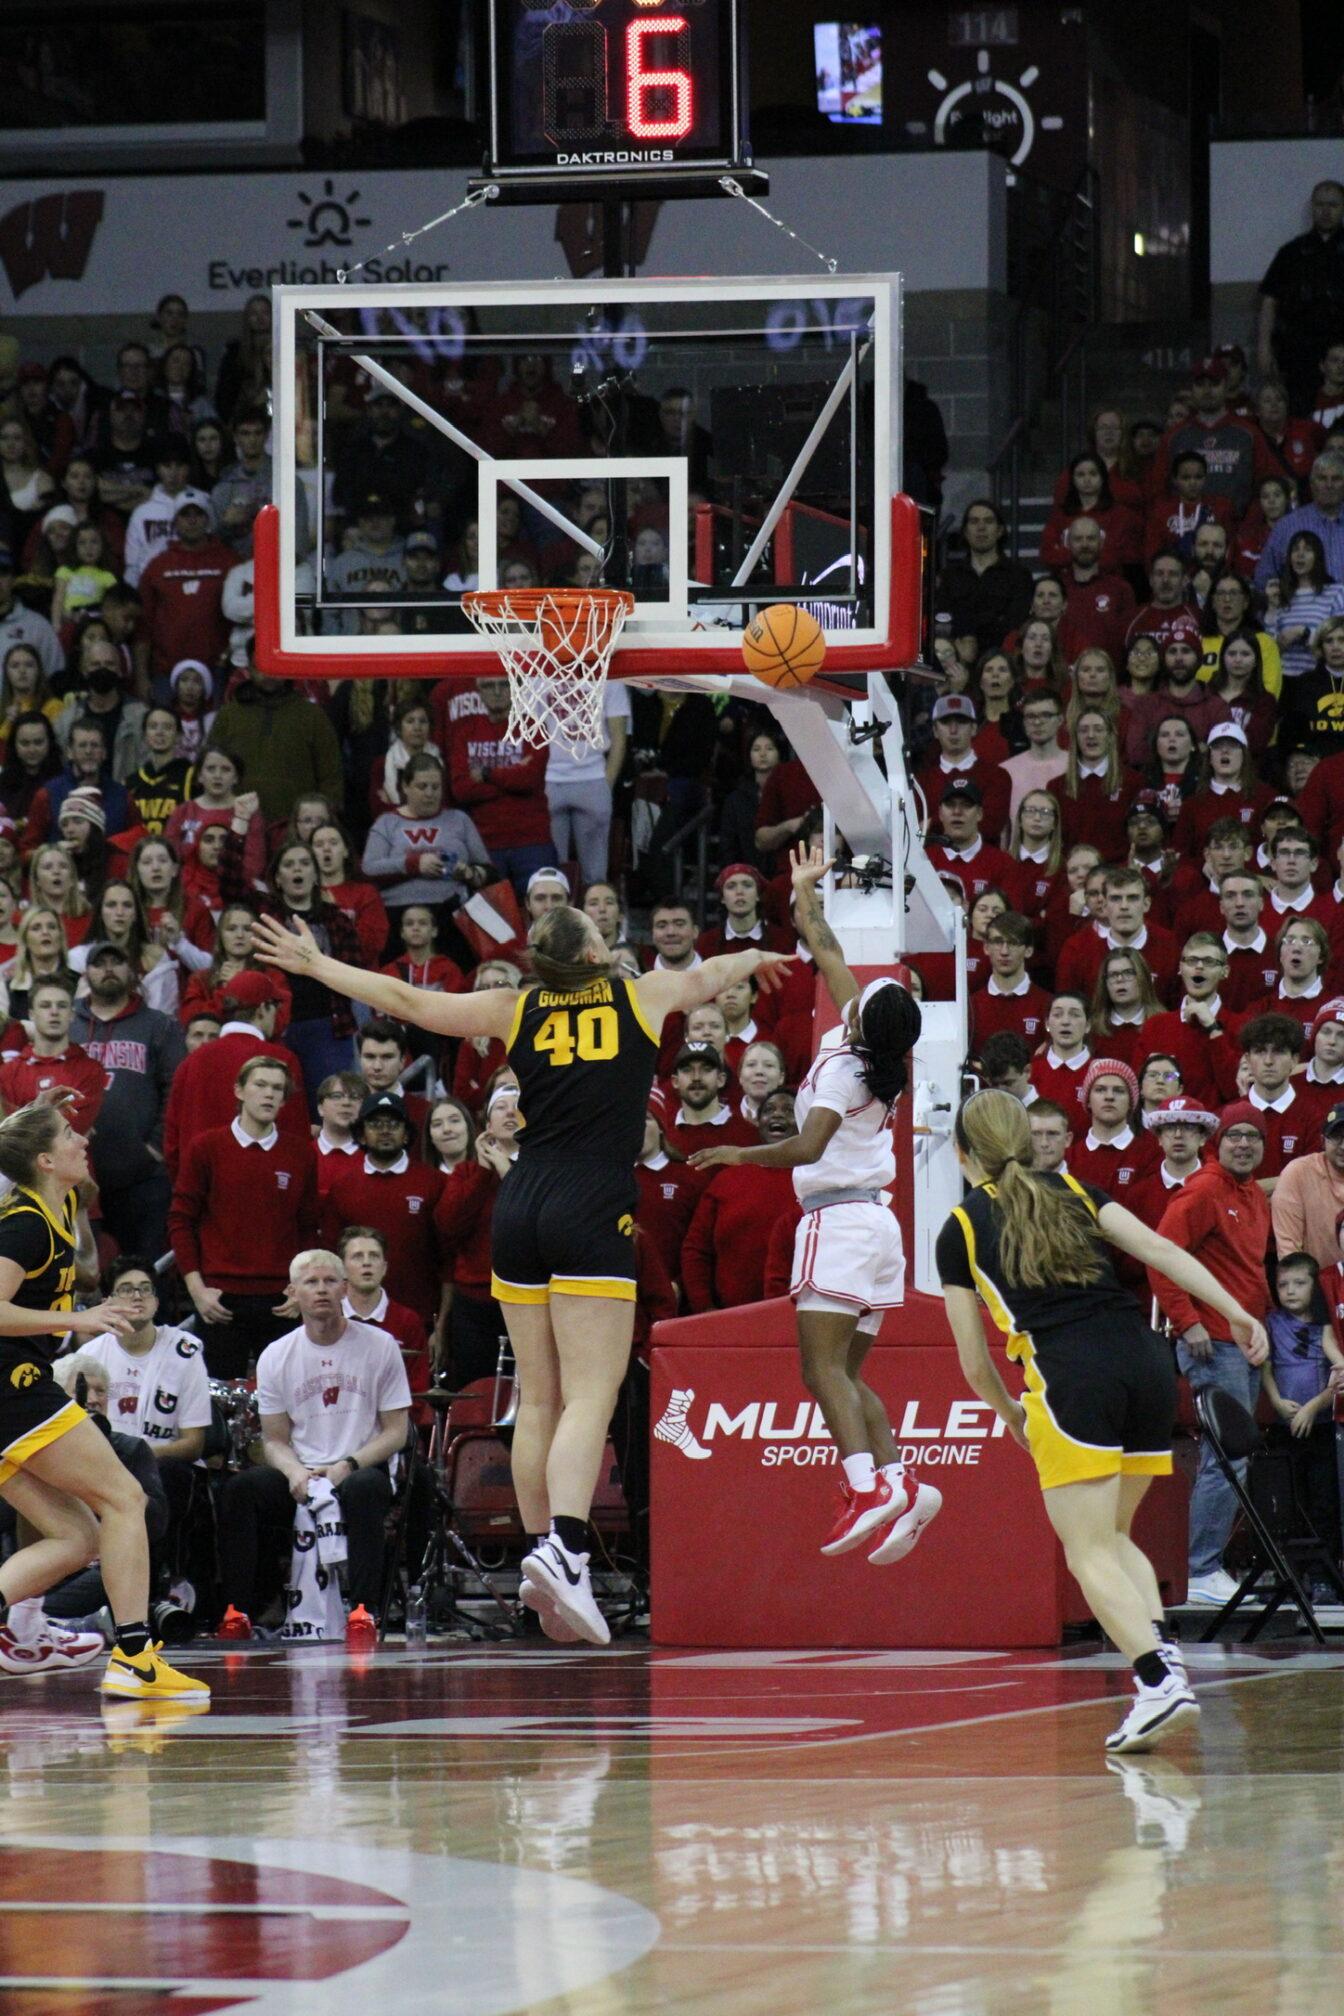 Women’s Basketball: Hawkeyes trounce Badgers in front of sellout crowd